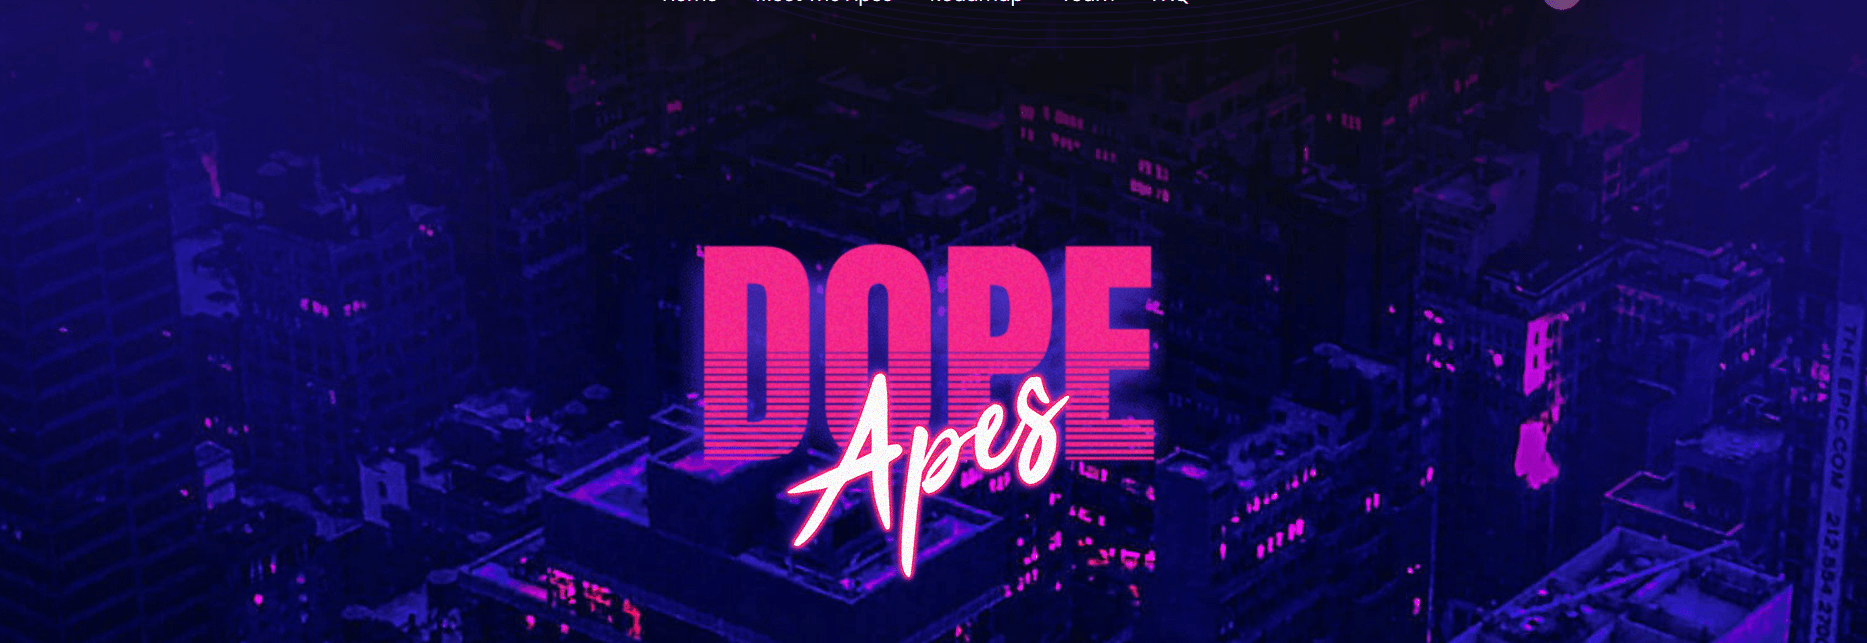 Dope Apes